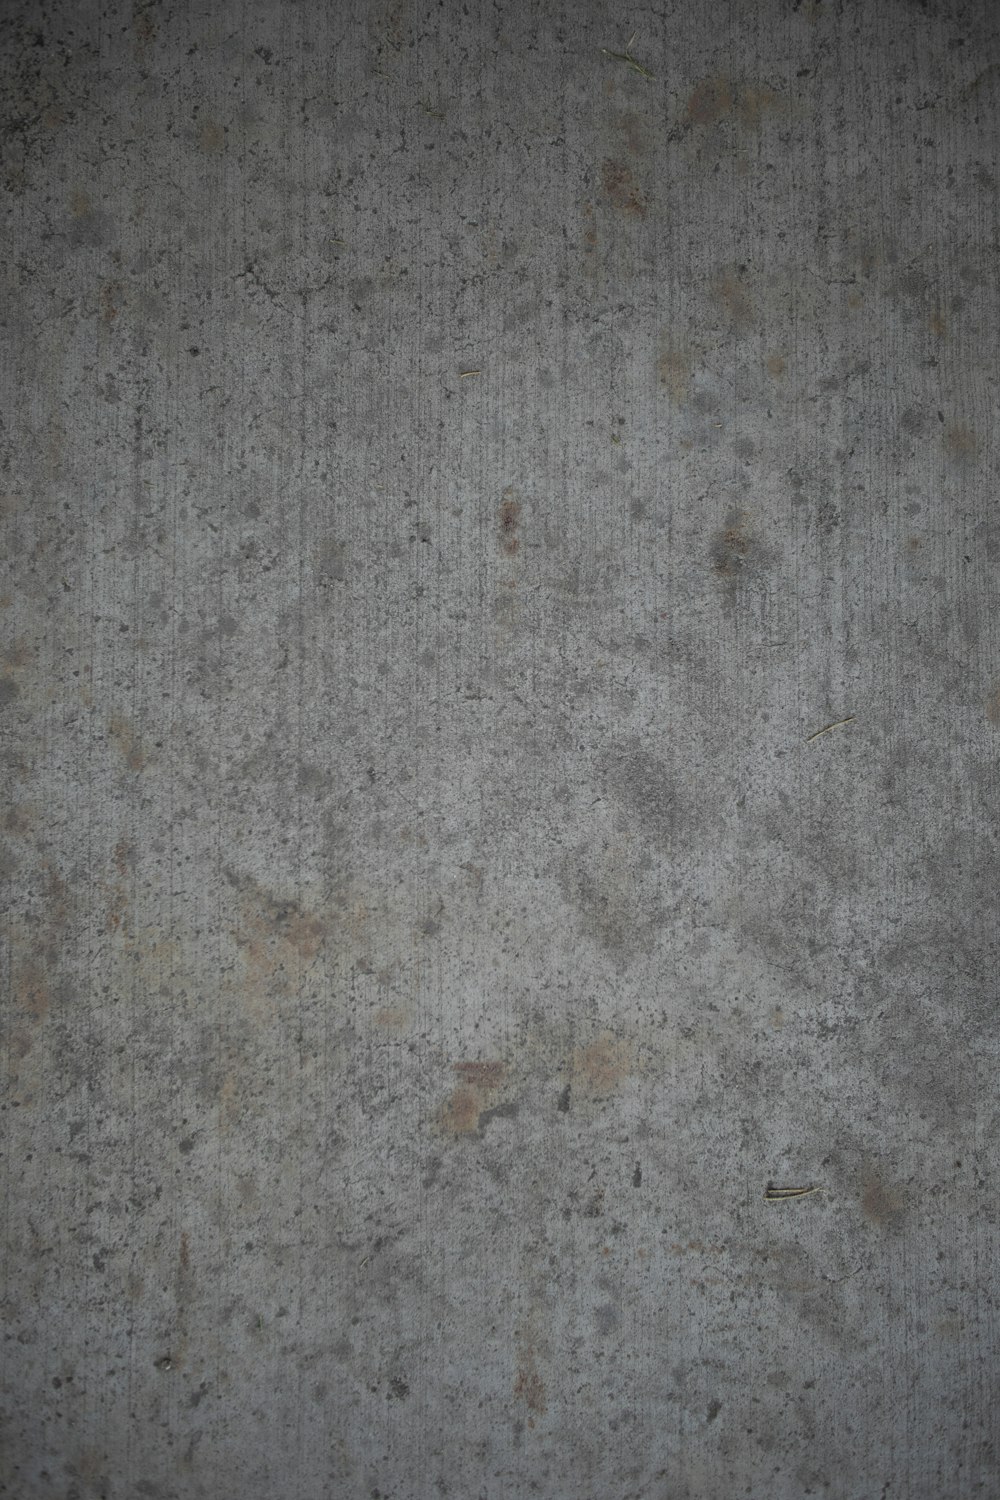 a grungy textured background of a concrete wall